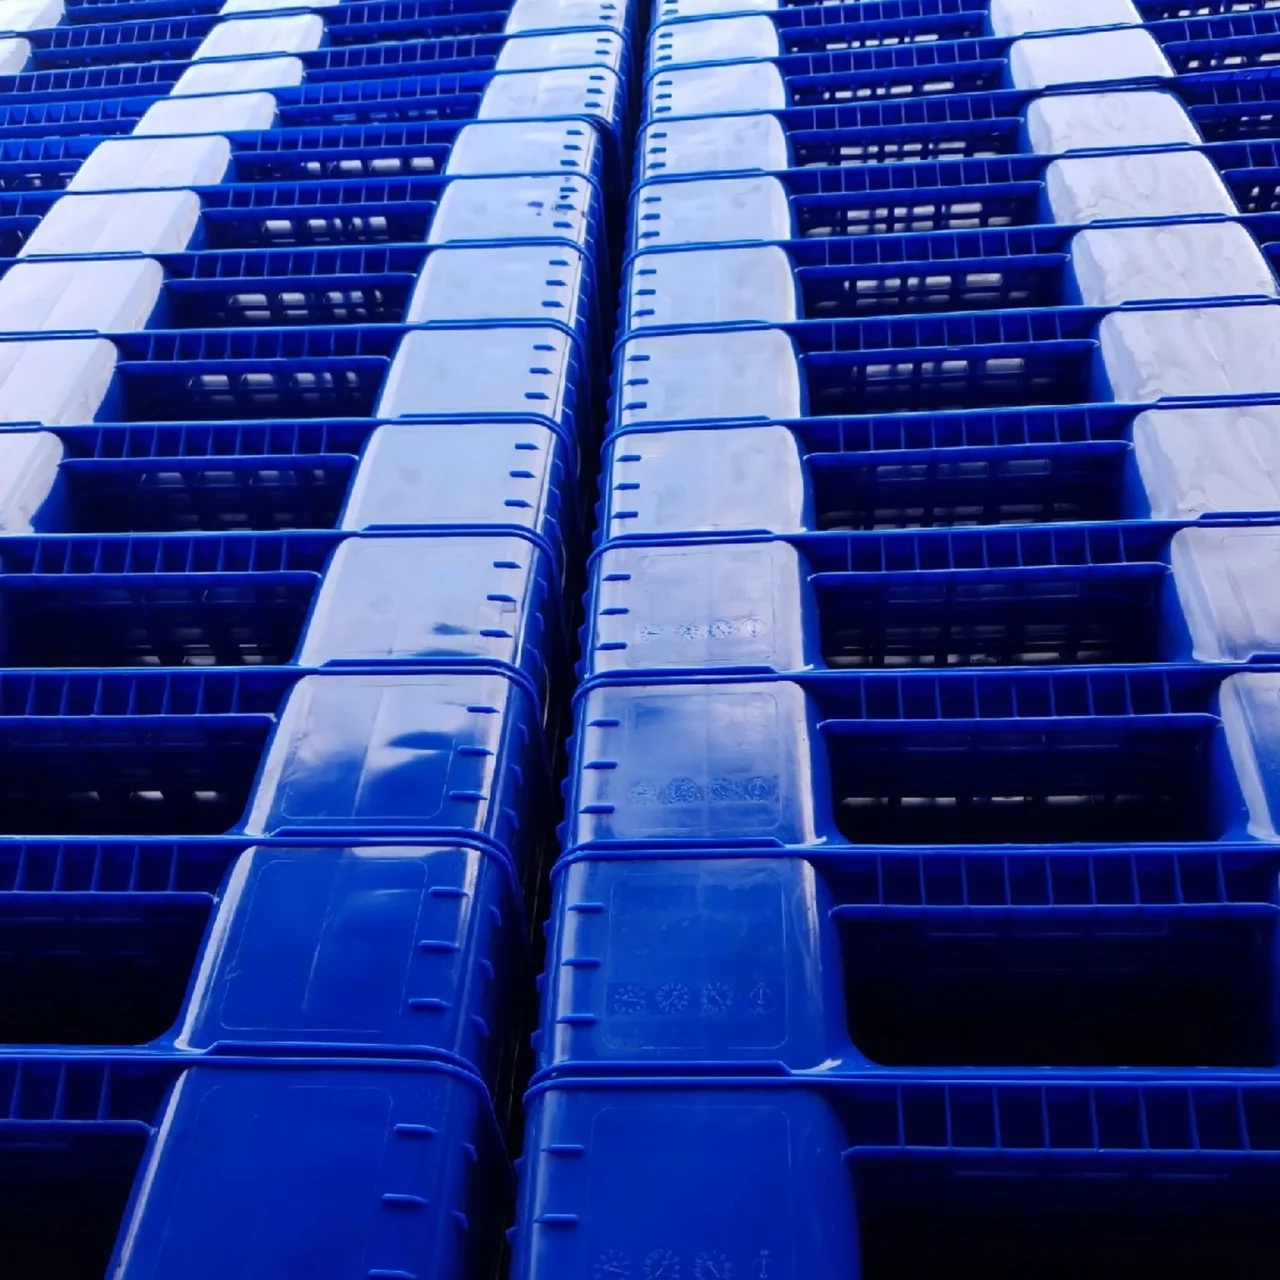 plastic crates arranged and assembled in the warehouse